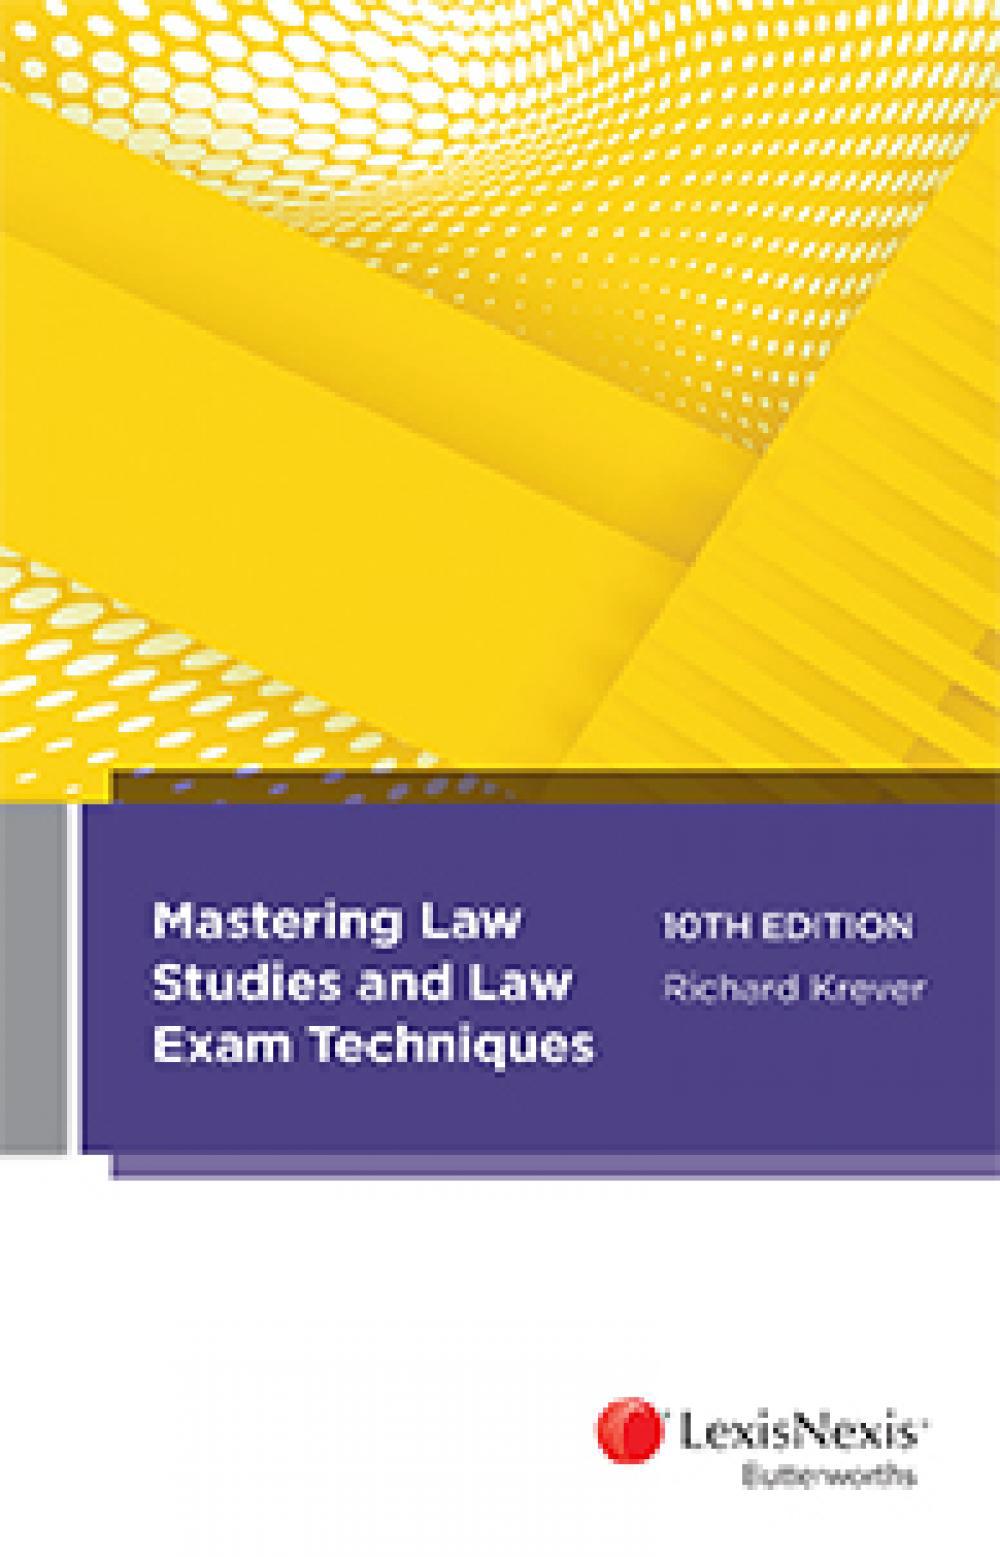 Mastering Law Studies and Law Exam Techniques by R. Krever, Paperback, 9780409349139 Buy